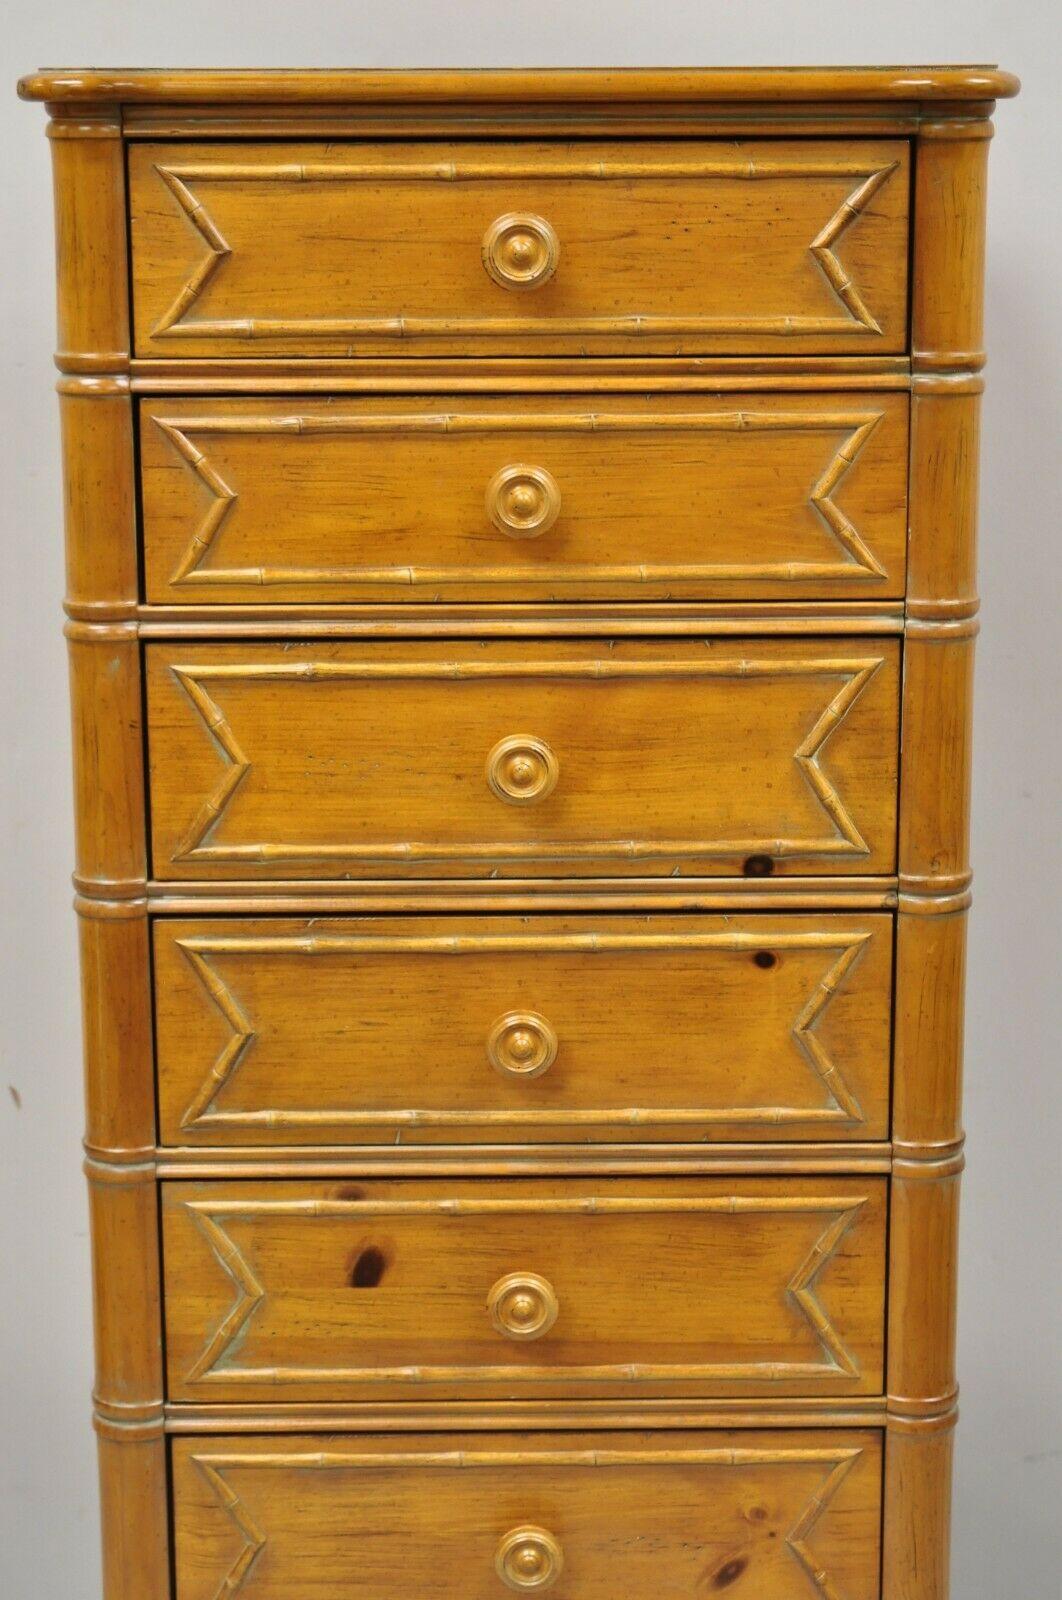 Ethan Allen Regency style faux bamboo 7 drawer Lingerie chest tall dresser. Item features faux bamboo columns, solid pine wood frame, beautiful wood grain, distressed finish, original label, 7 dovetailed drawers, quality craftsmanship, great style